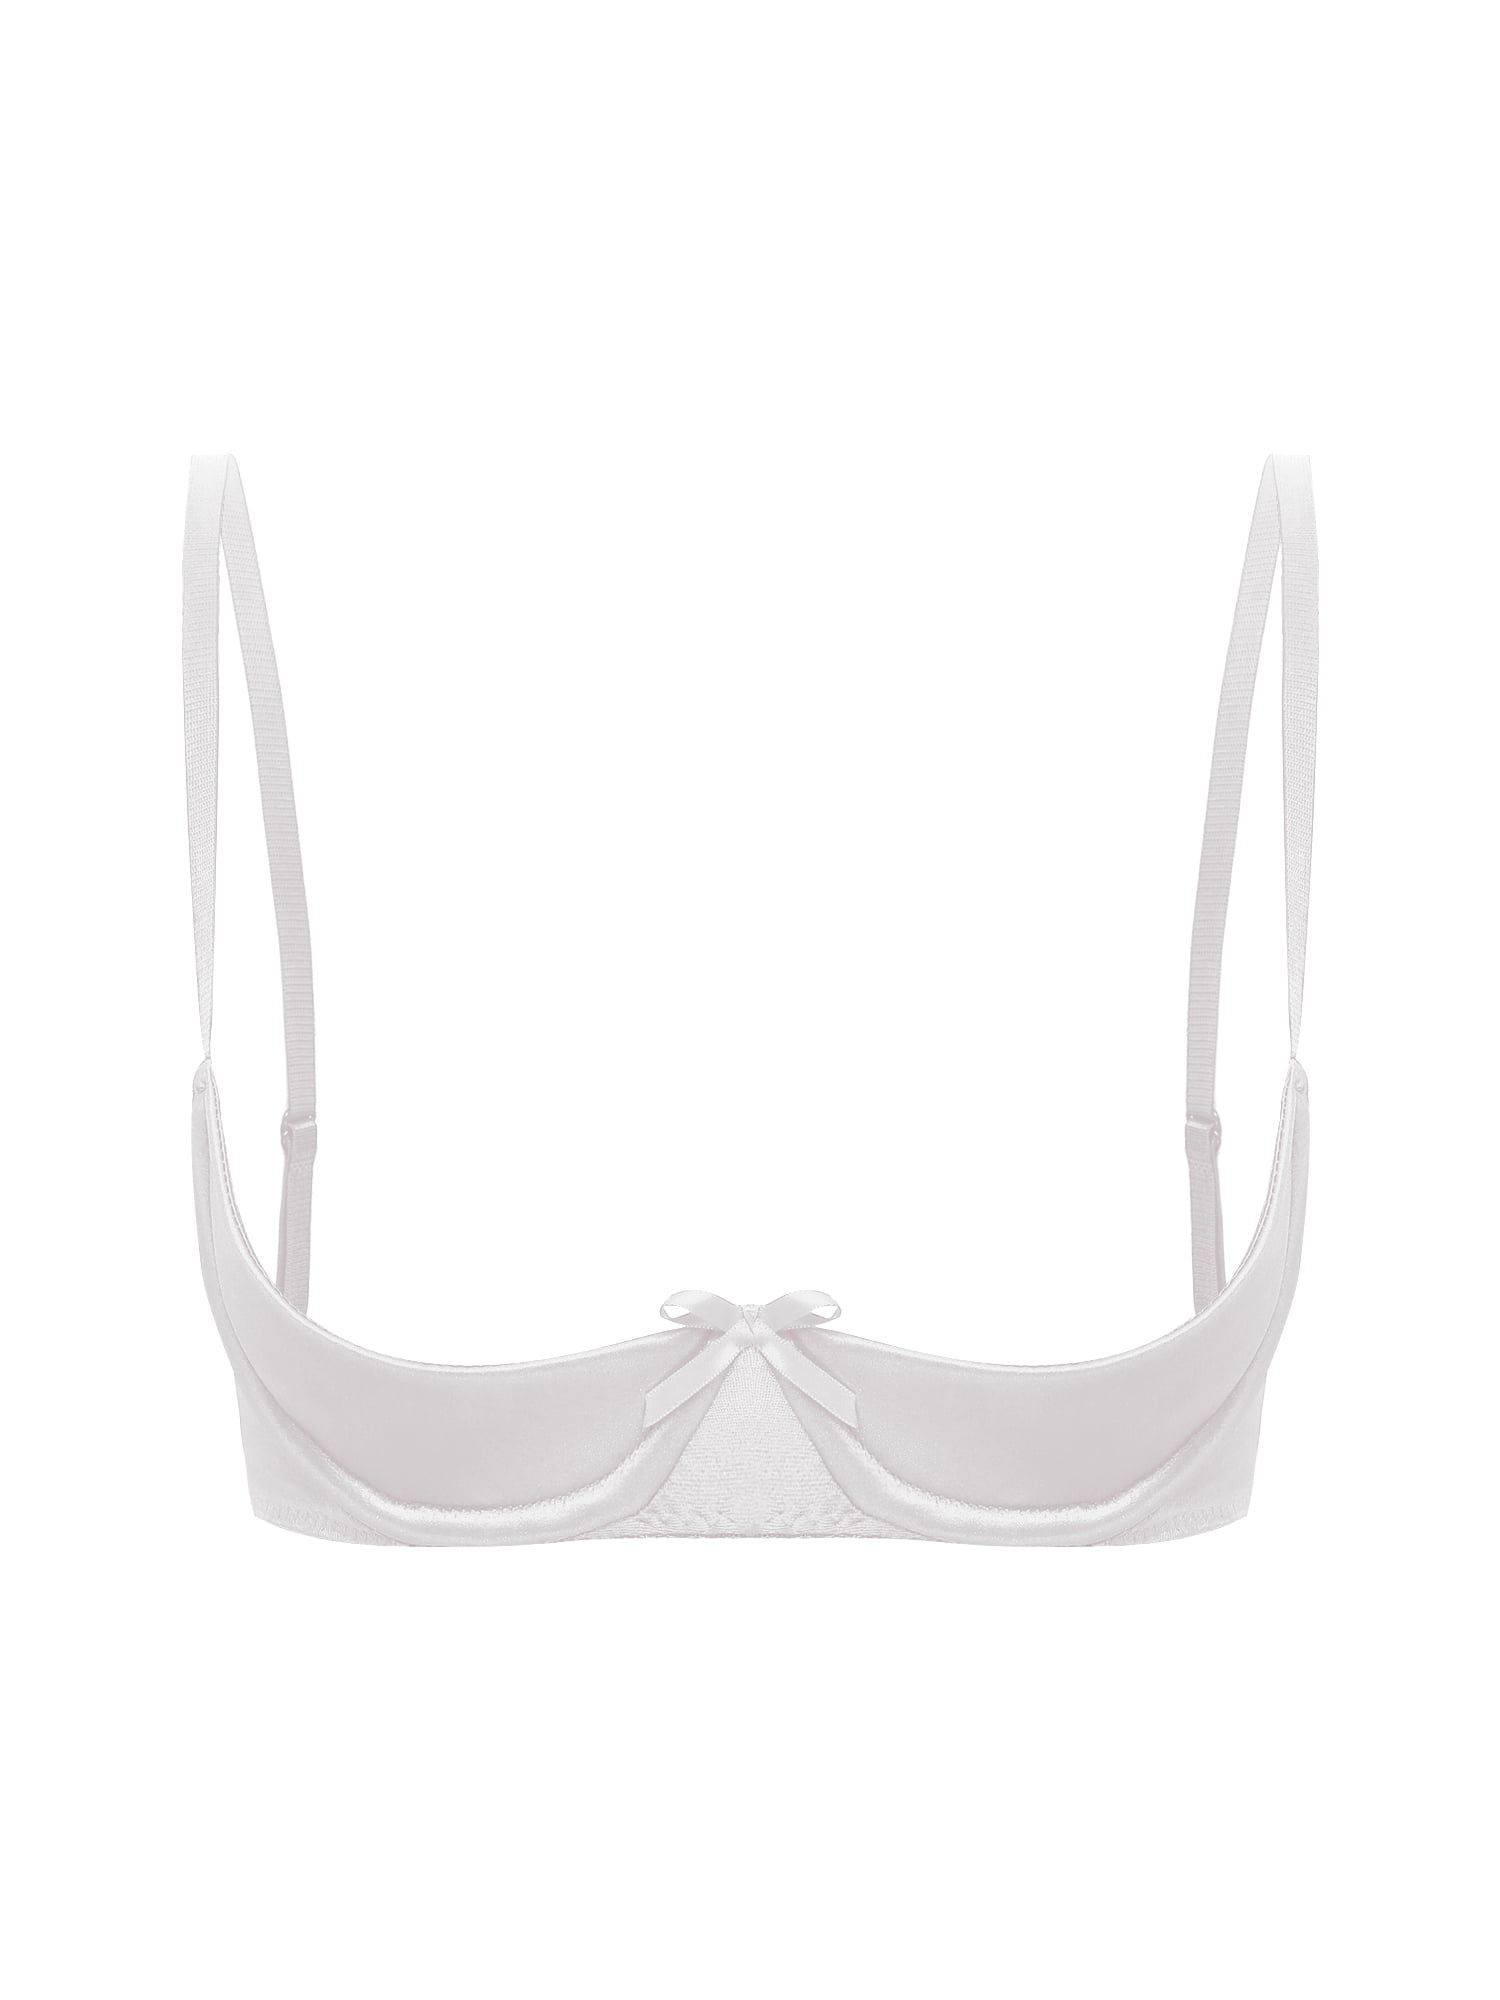 CHICTRY Womens Sheer Lace 1/4 Cups Bra Tops Open Cups Underwire Push Up  Brassiere Lingerie White 4XL 